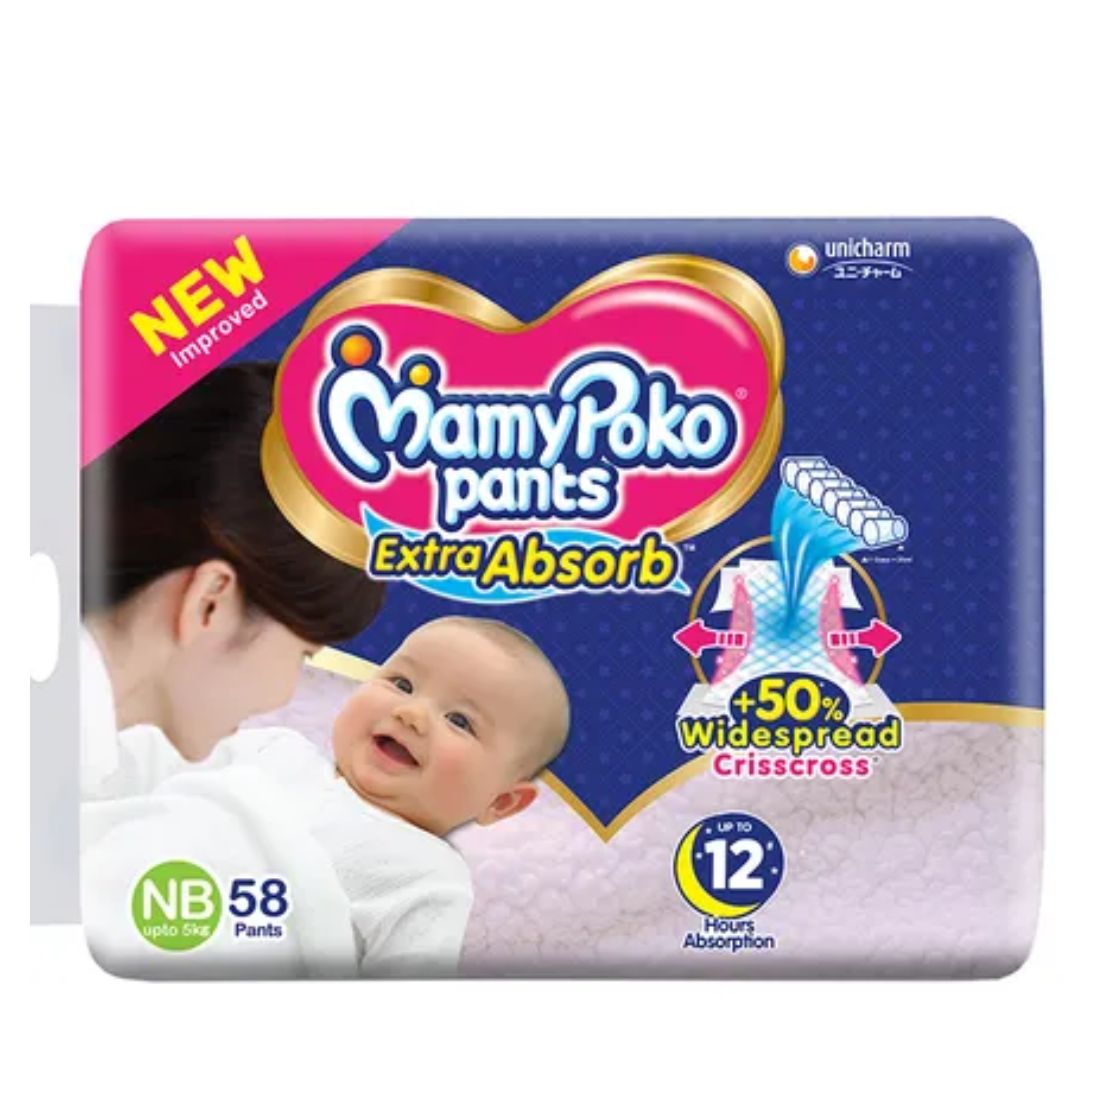 Buy Mamypoko Pants has stretchable thigh support which prevents thigh gaps and hence prevents leakage